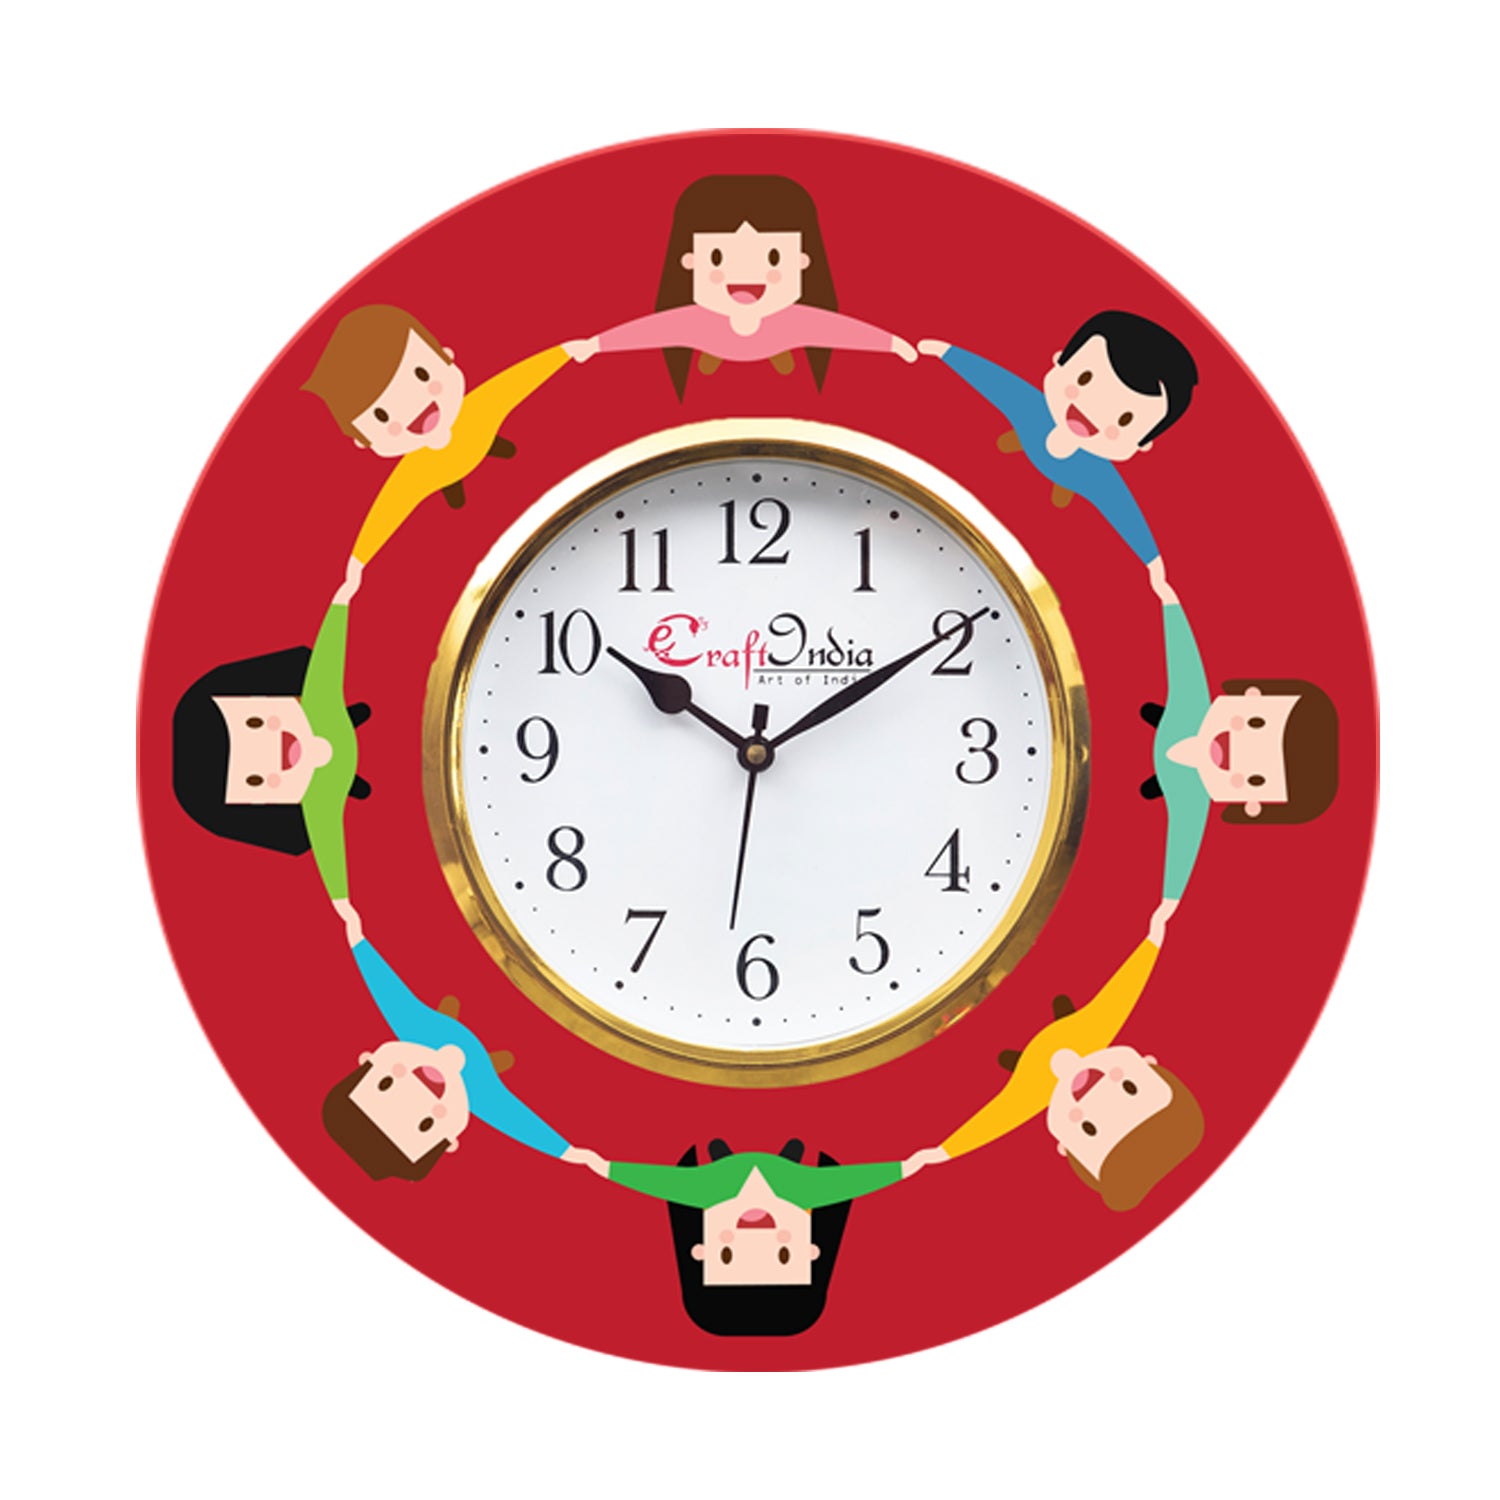 Friendship Theme Wooden Colorful Round Wall Clock